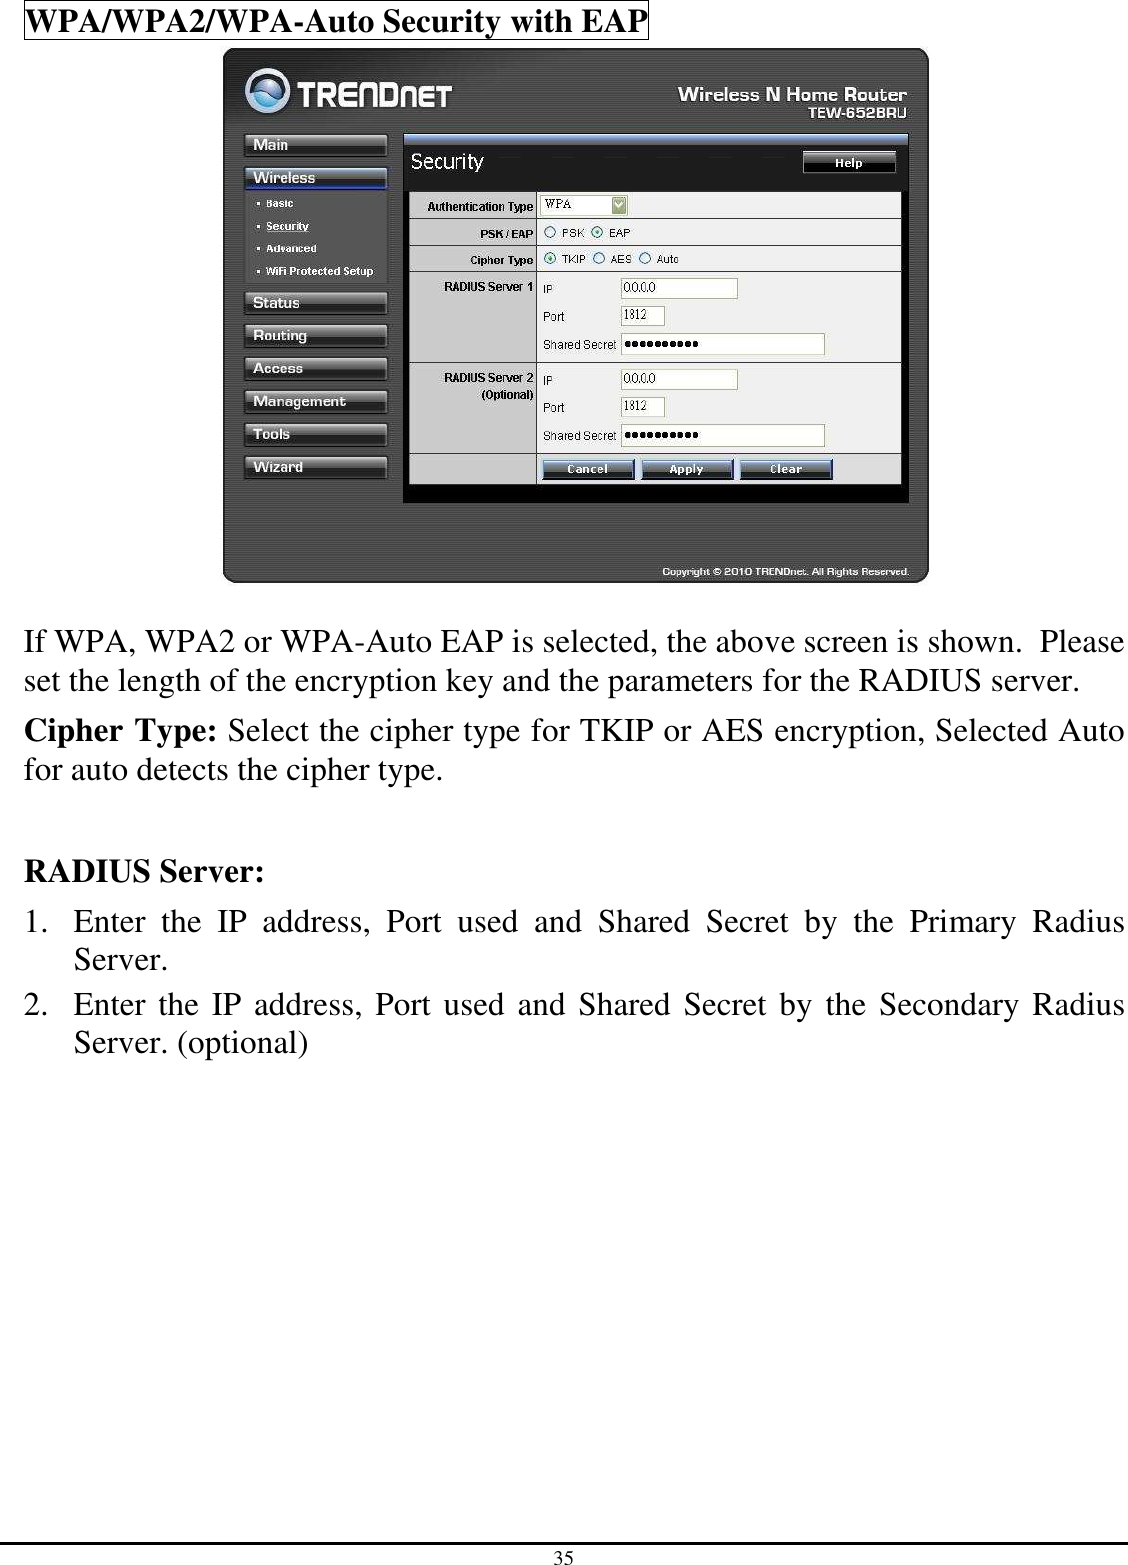 35 WPA/WPA2/WPA-Auto Security with EAP   If WPA, WPA2 or WPA-Auto EAP is selected, the above screen is shown.  Please set the length of the encryption key and the parameters for the RADIUS server. Cipher Type: Select the cipher type for TKIP or AES encryption, Selected Auto for auto detects the cipher type.   RADIUS Server: 1. Enter  the  IP  address,  Port  used  and  Shared  Secret  by  the  Primary  Radius Server. 2. Enter the IP address, Port used and Shared Secret by the Secondary Radius Server. (optional)           